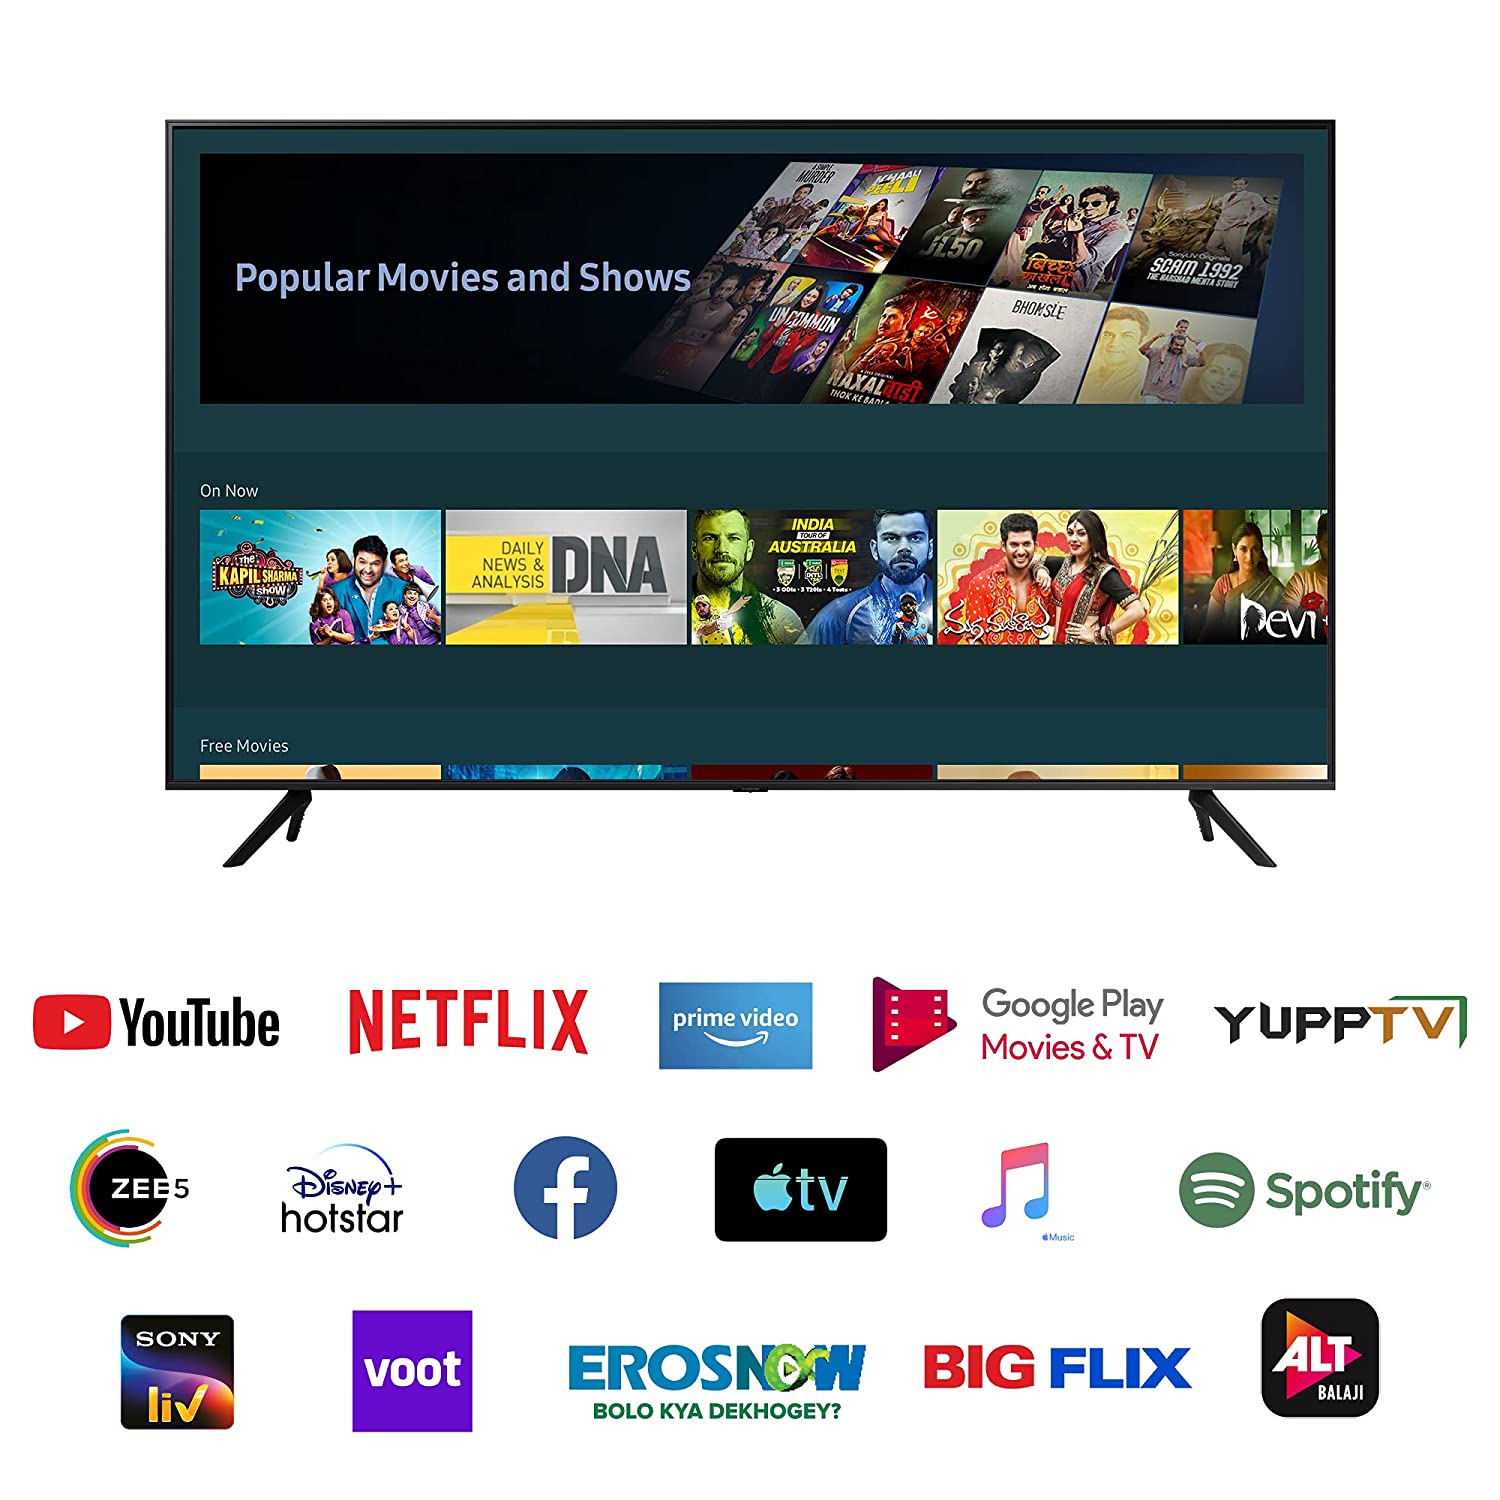 Amazon Great Indian Festival Sale: Samsung 55 Inch Smart TV will not be available this cheap again, buy it on Amazon for less than 50 thousand